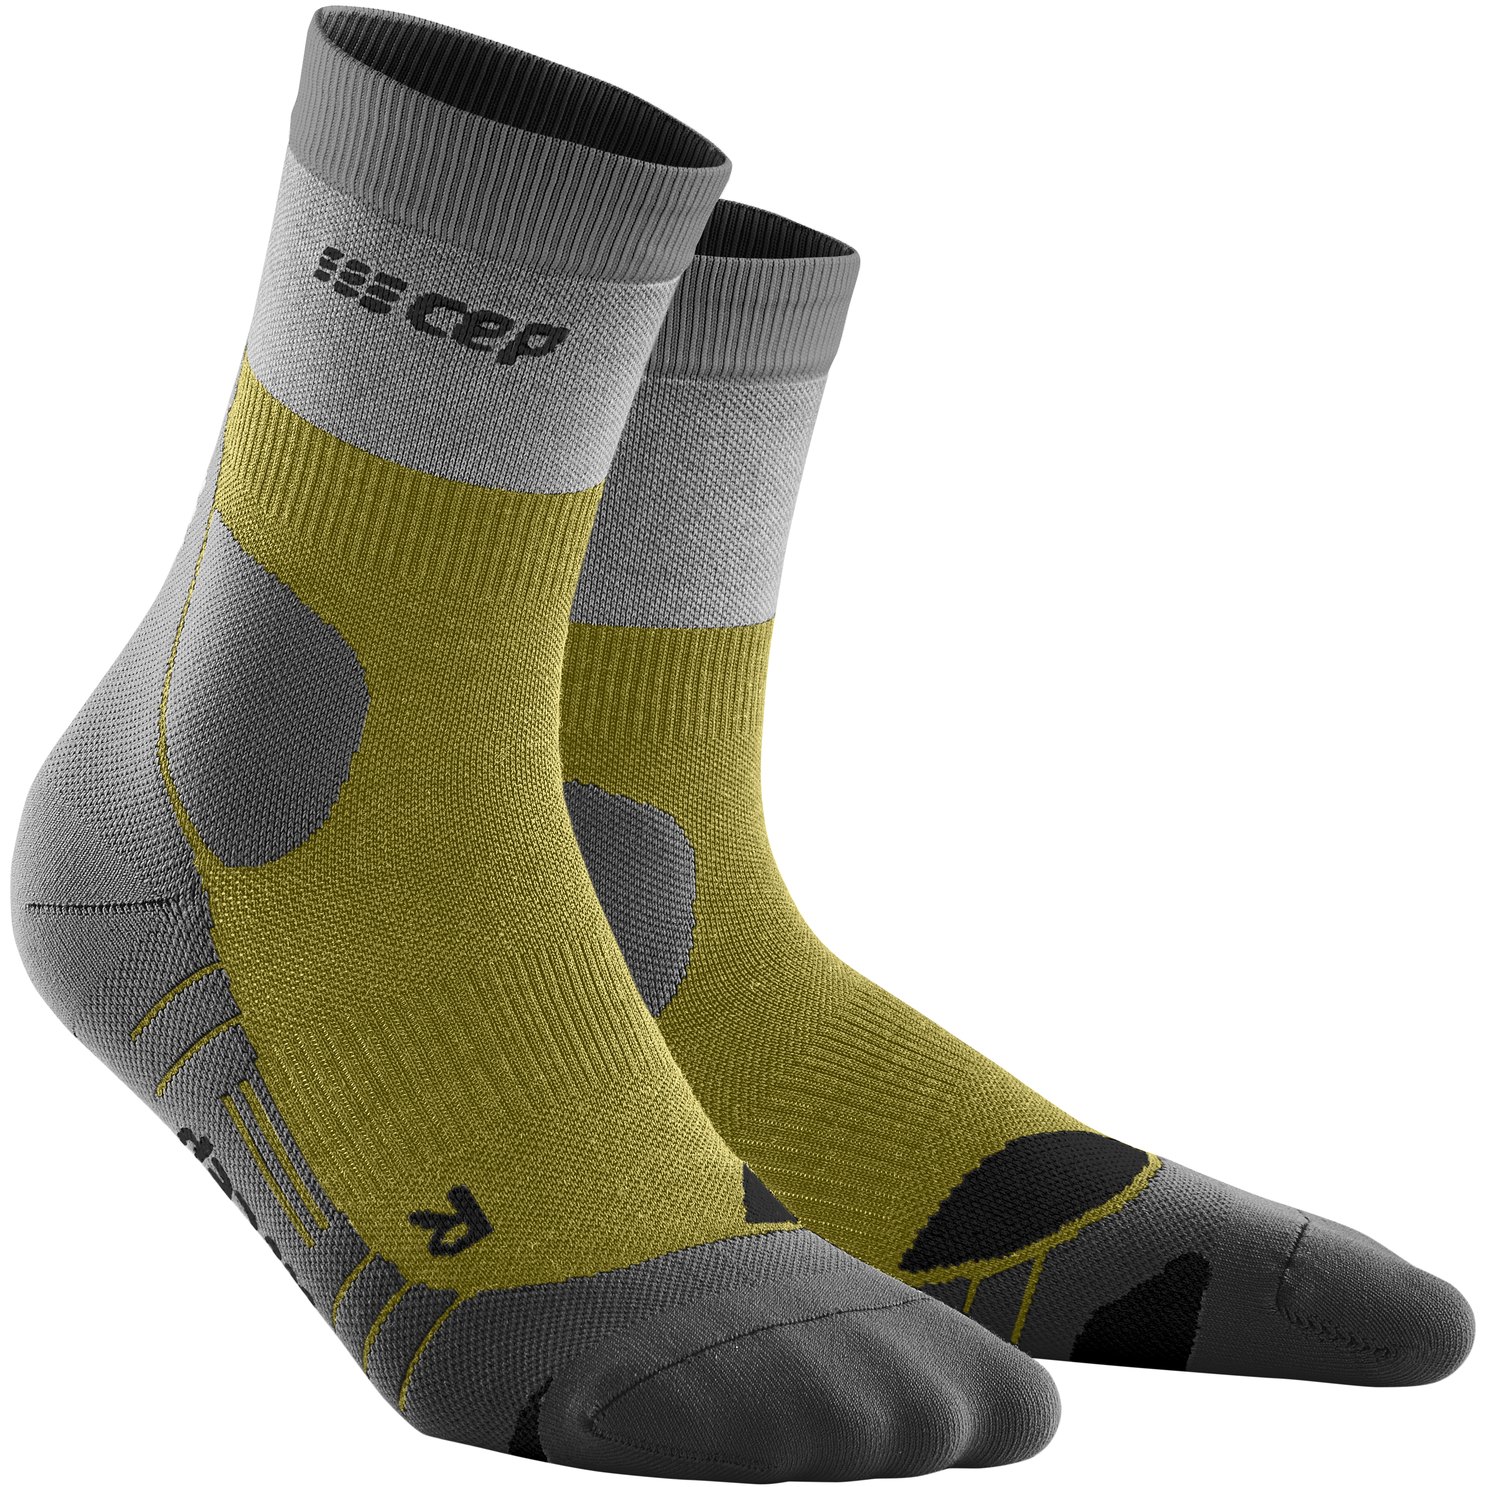 Picture of CEP Hiking Light Merino Mid Cut Compression Socks - olive/grey